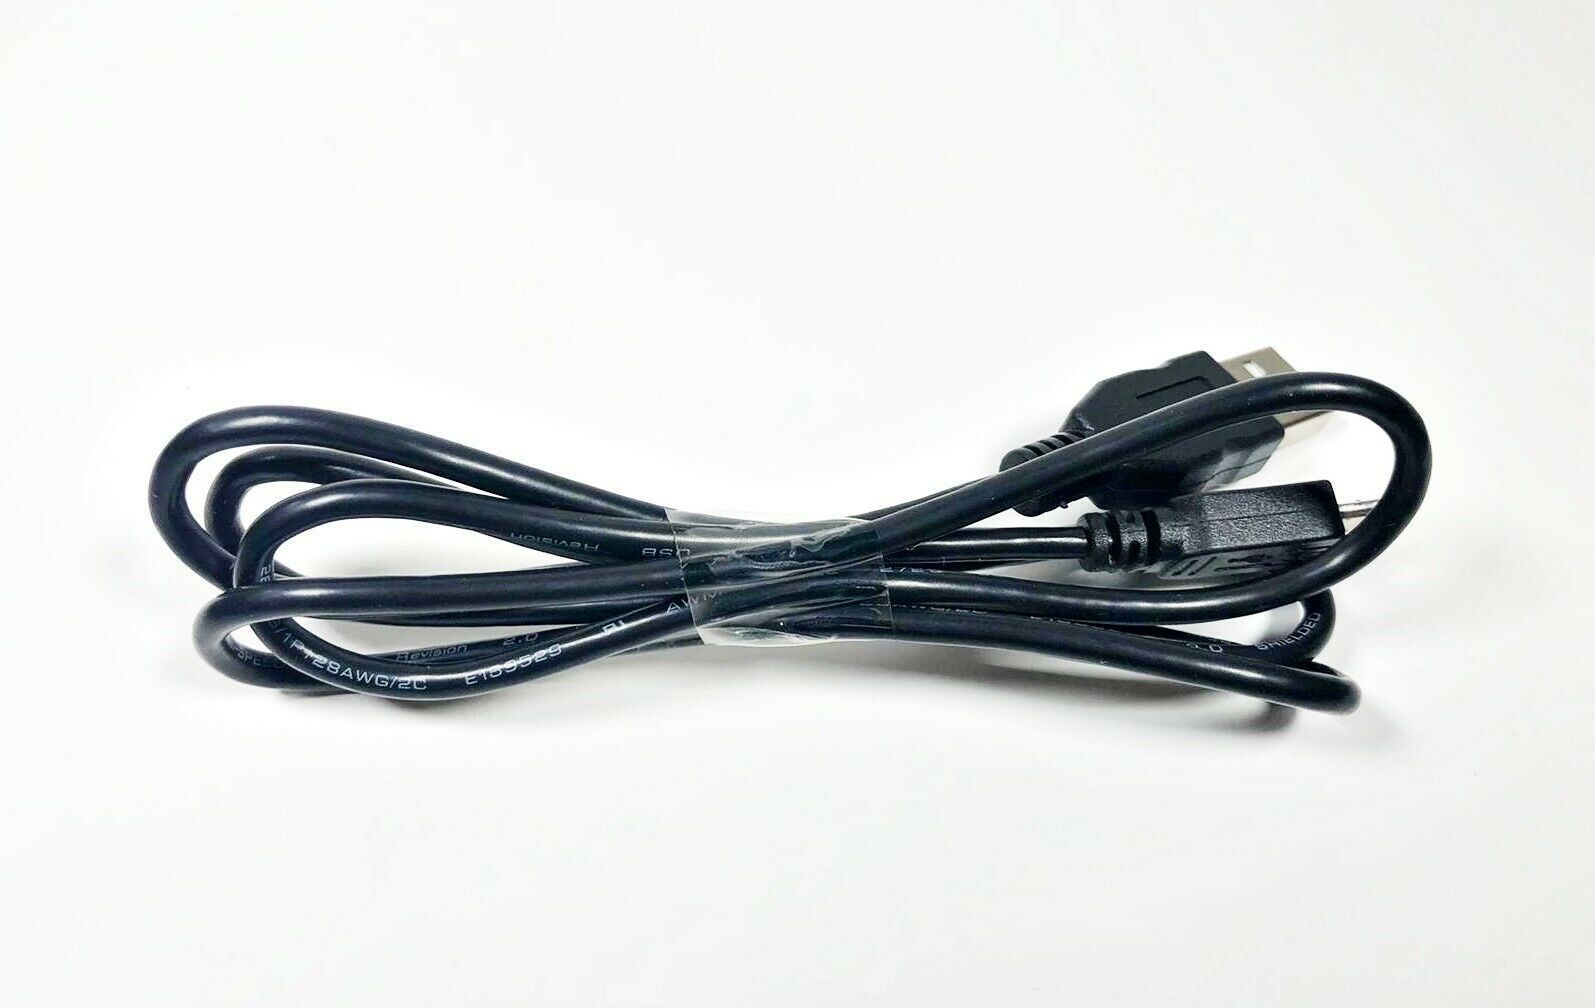 USB Hi-Speed Android Cable E189529 28awg/2c - $20.05